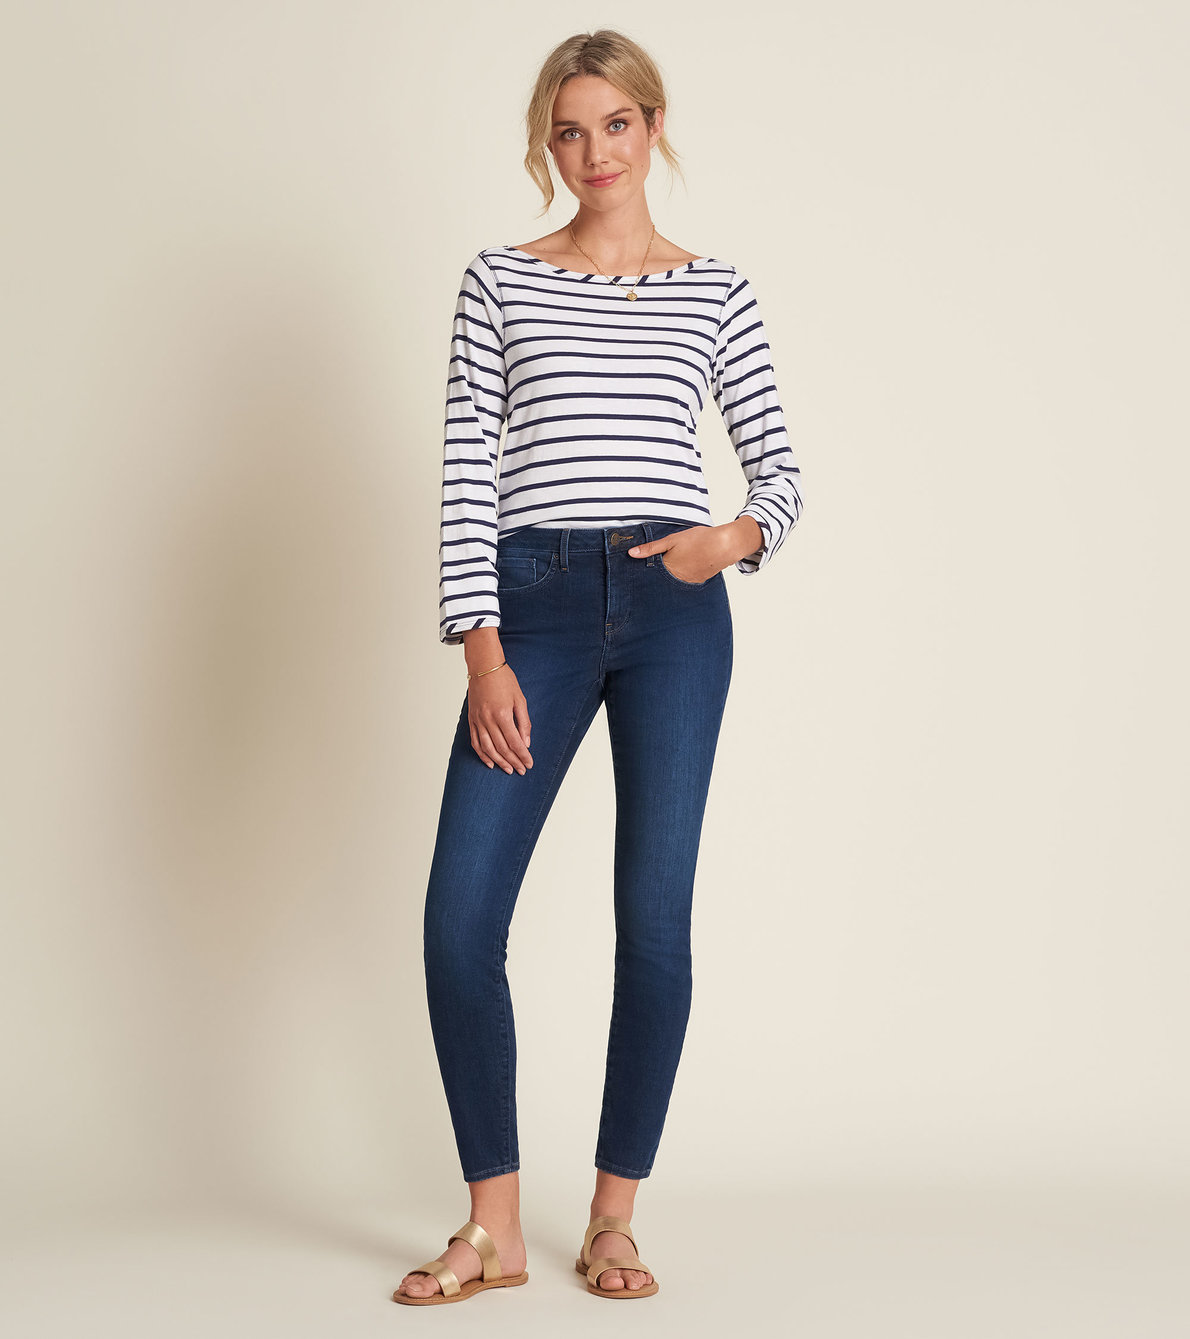 View larger image of 3/4 Sleeve Breton - Navy Stripes